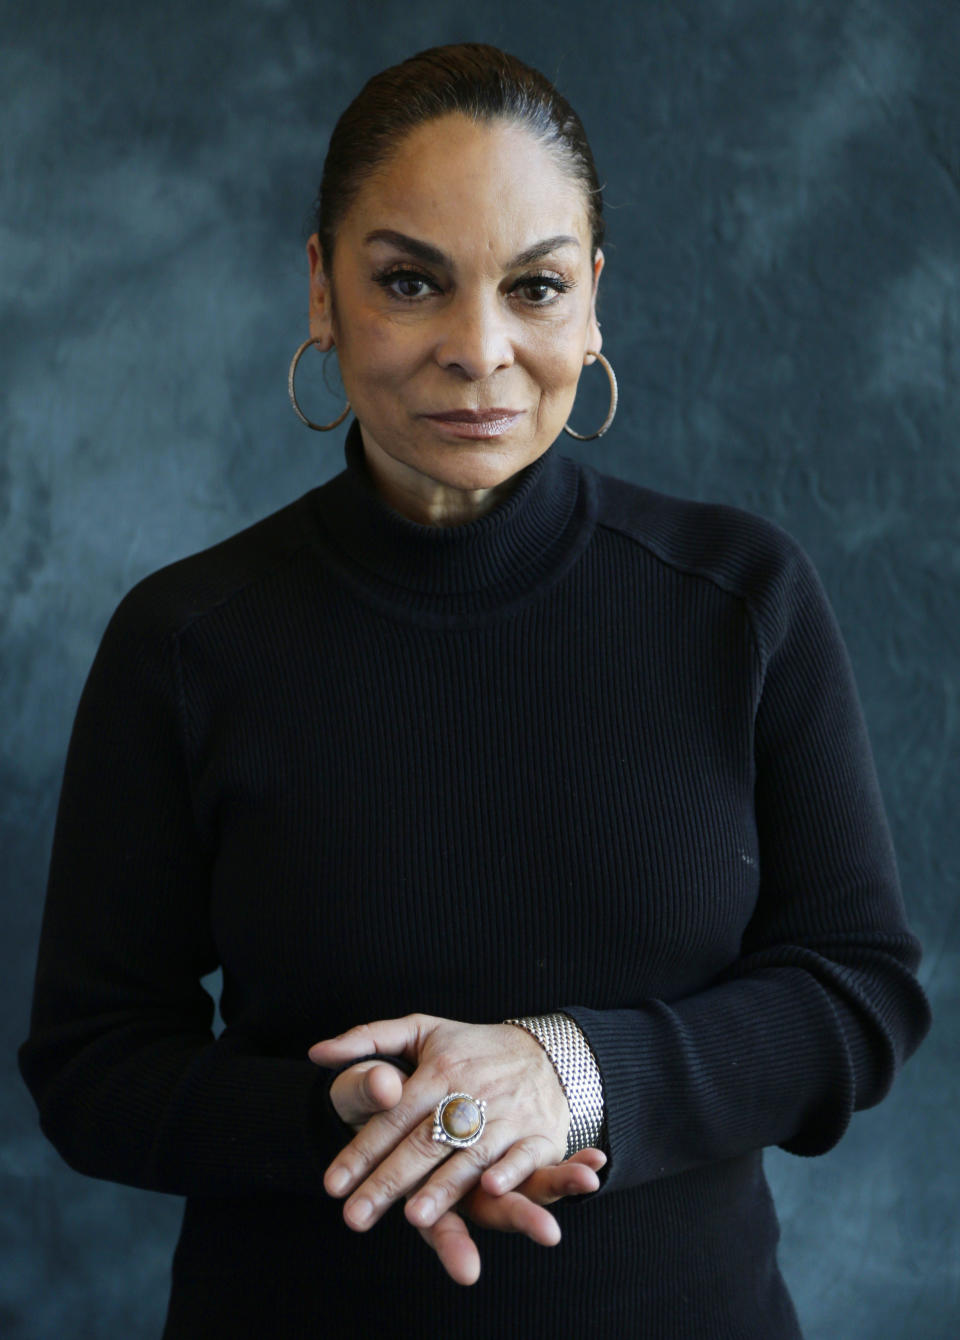 This Jan. 19, 2017, photo shows actress Jasmine Guy in New York to promote her BET drama "The Quad." The series premieres Wednesday, Feb. 1. (AP Photo/Peter Morgan)